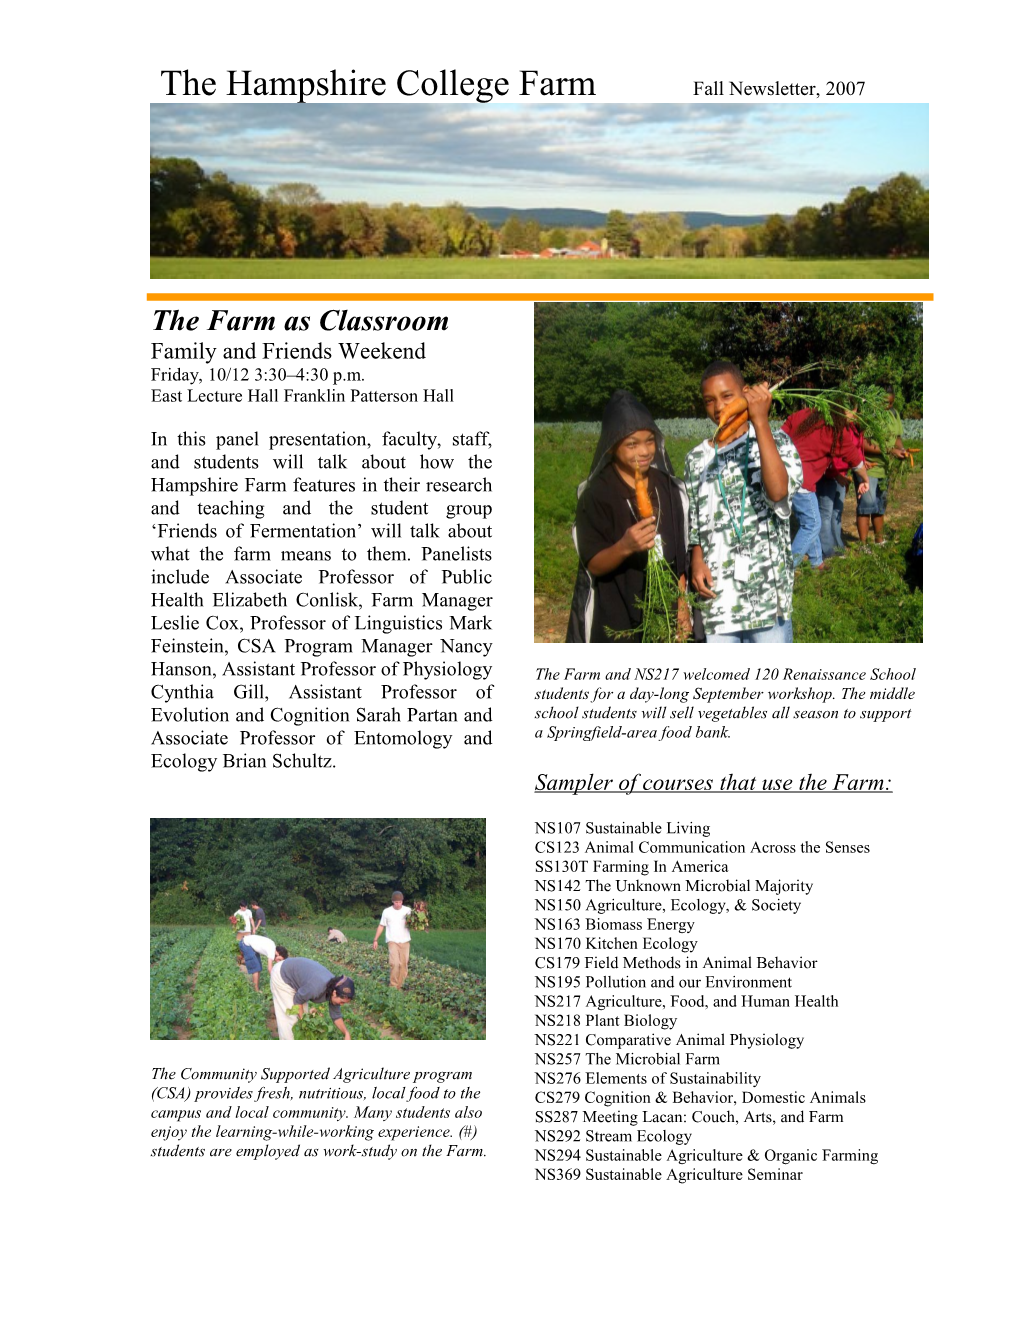 The Hampshirecollege Farm Fall Newsletter, 2007